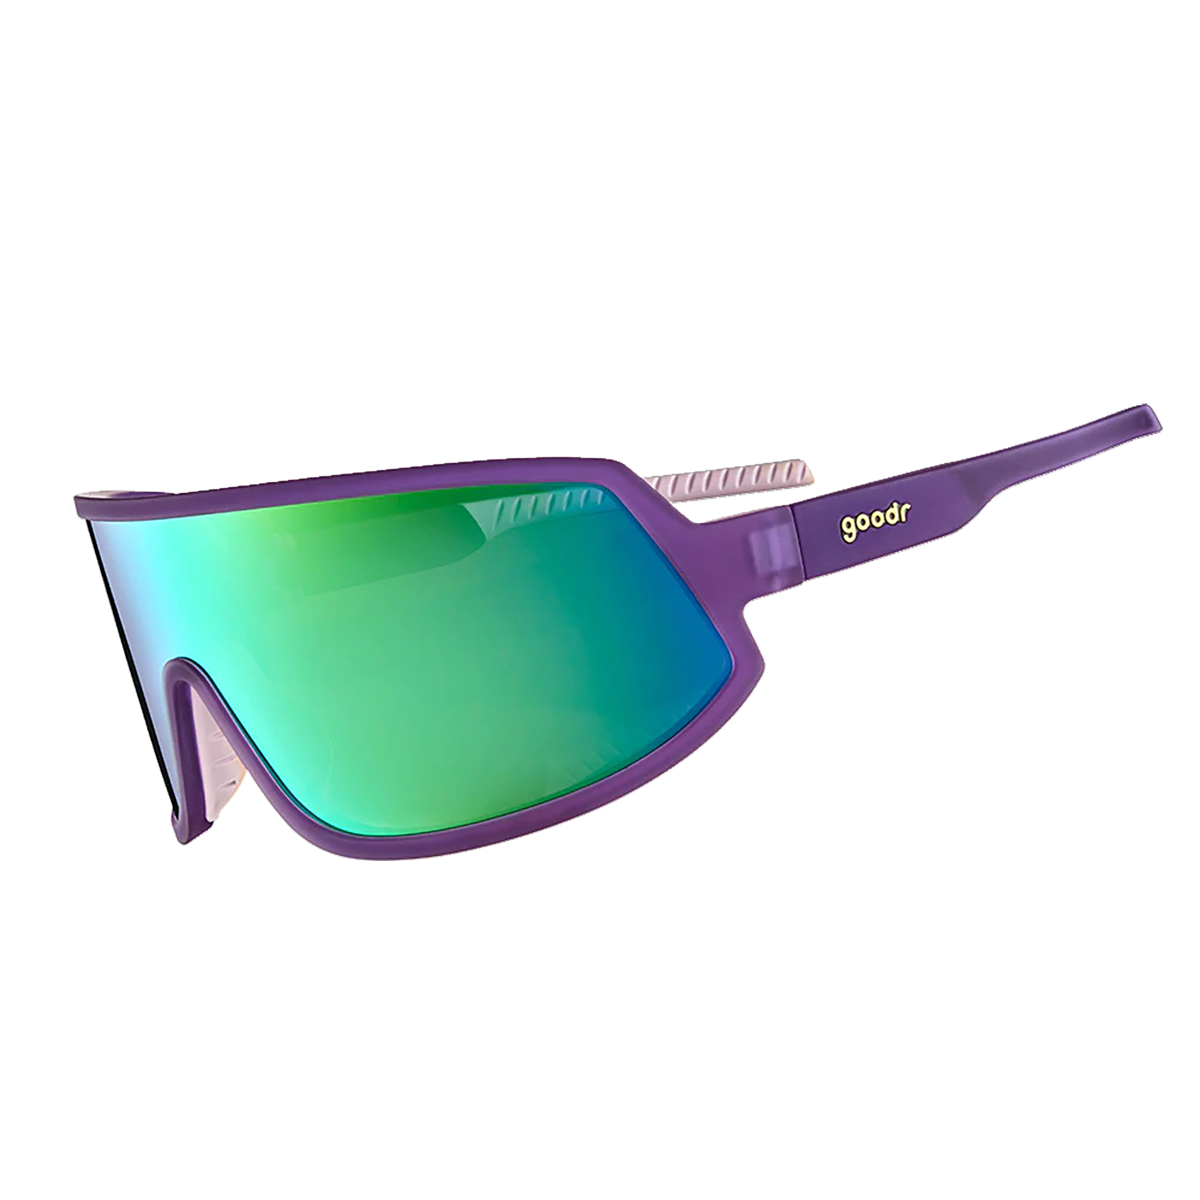 Goodr WG Mirrored Reflective Sunglasses, , large image number null